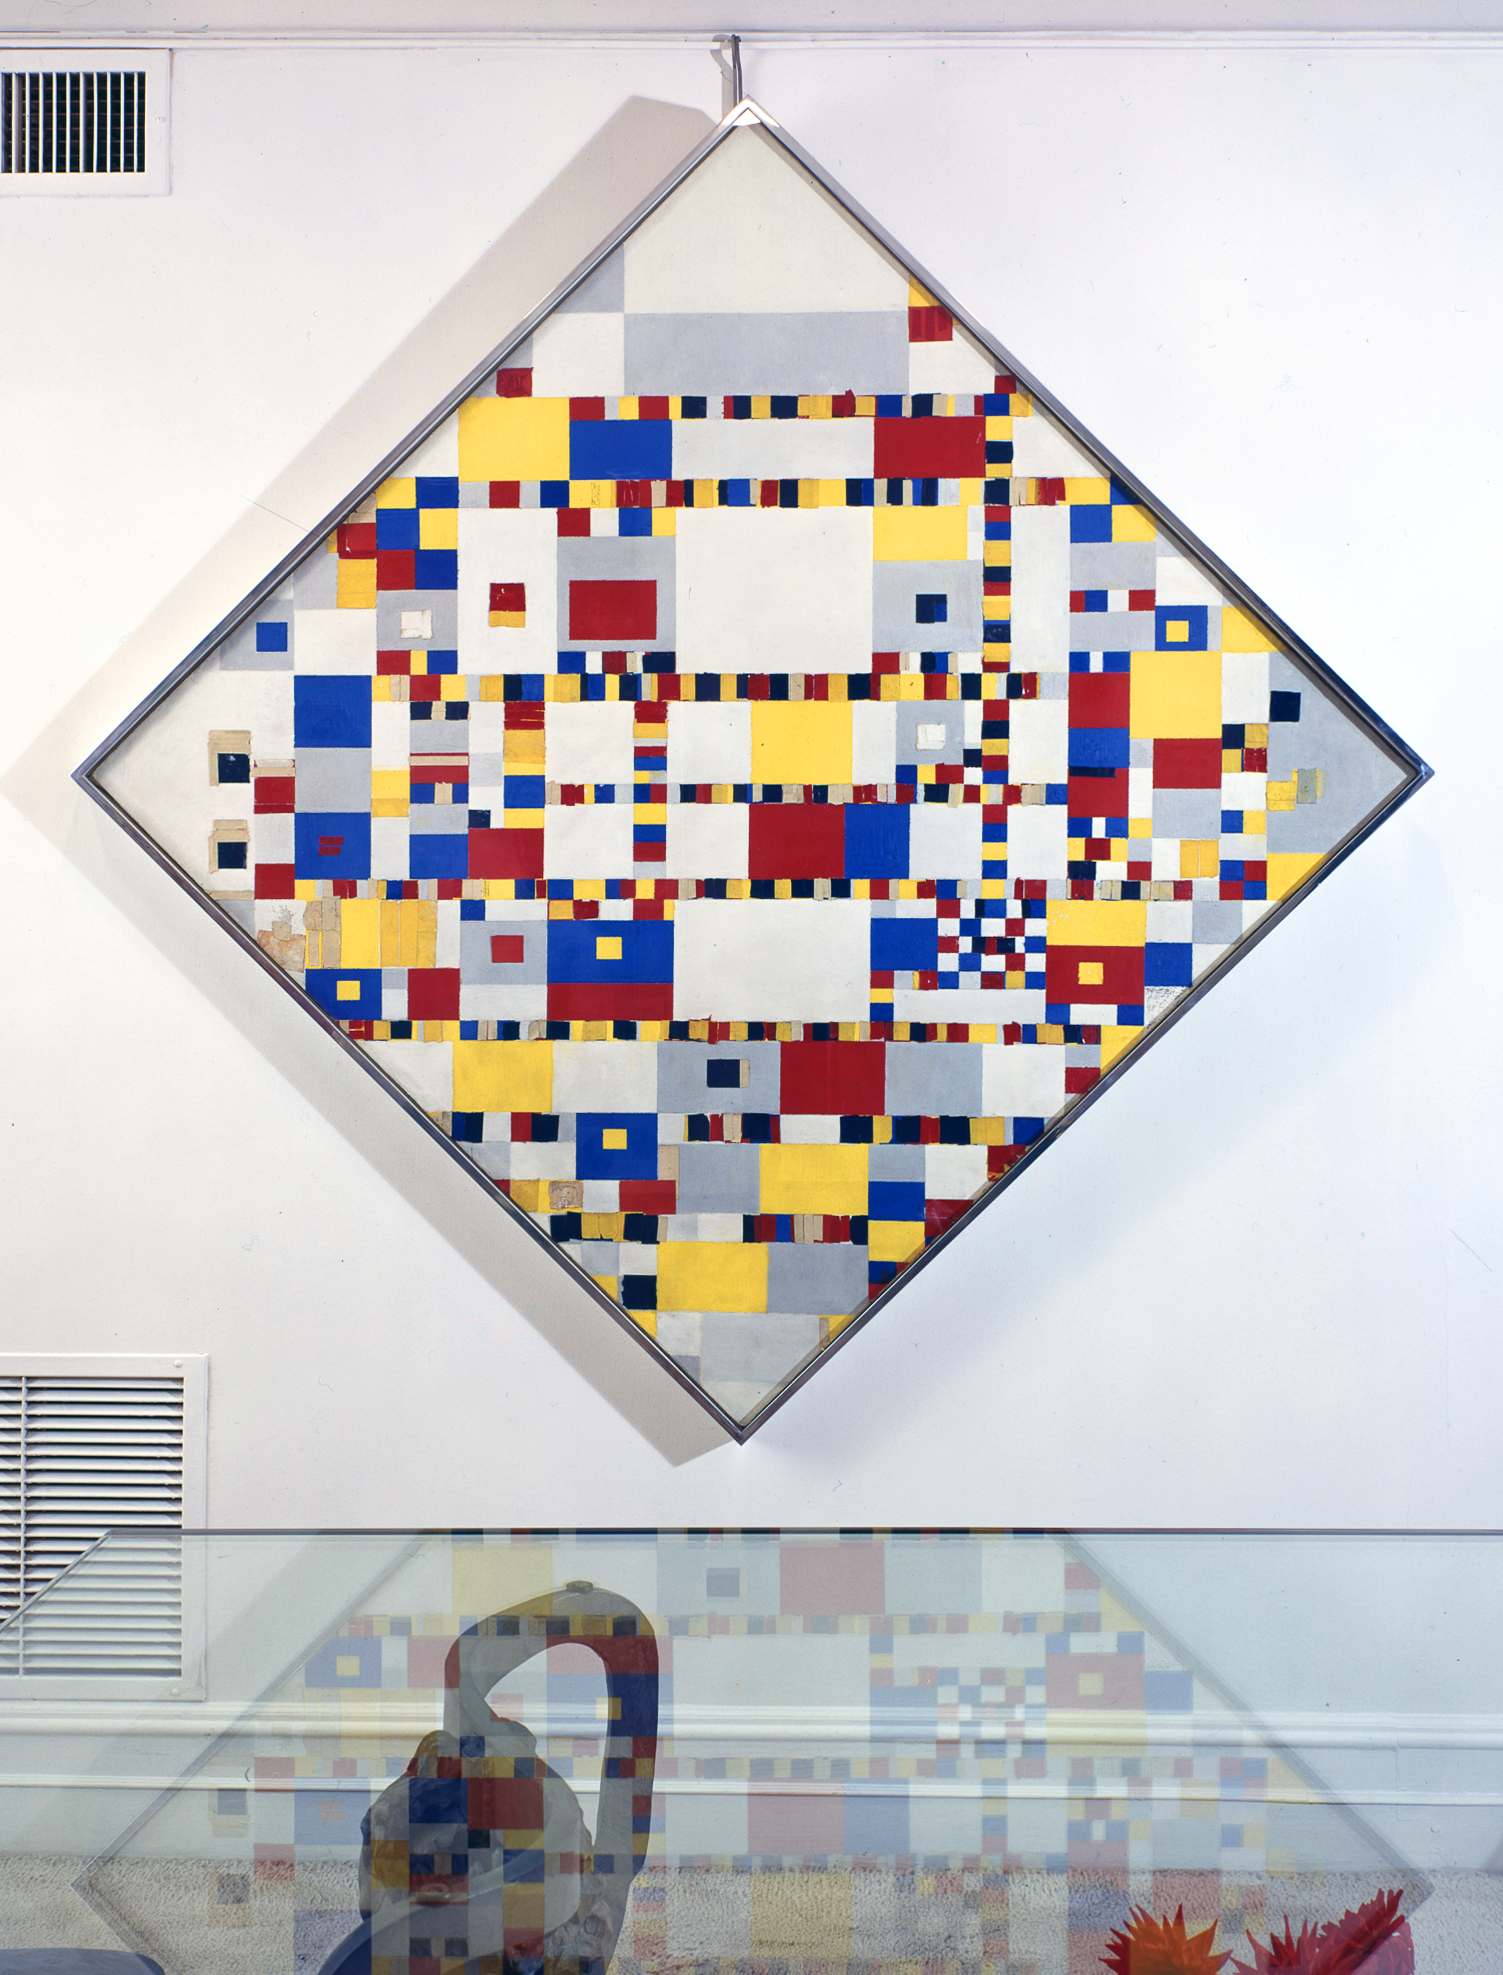 Piet Mondrian, Victory Boogie-Woogie, 1944, in the home of Burton and Emily Hall Tremaine.